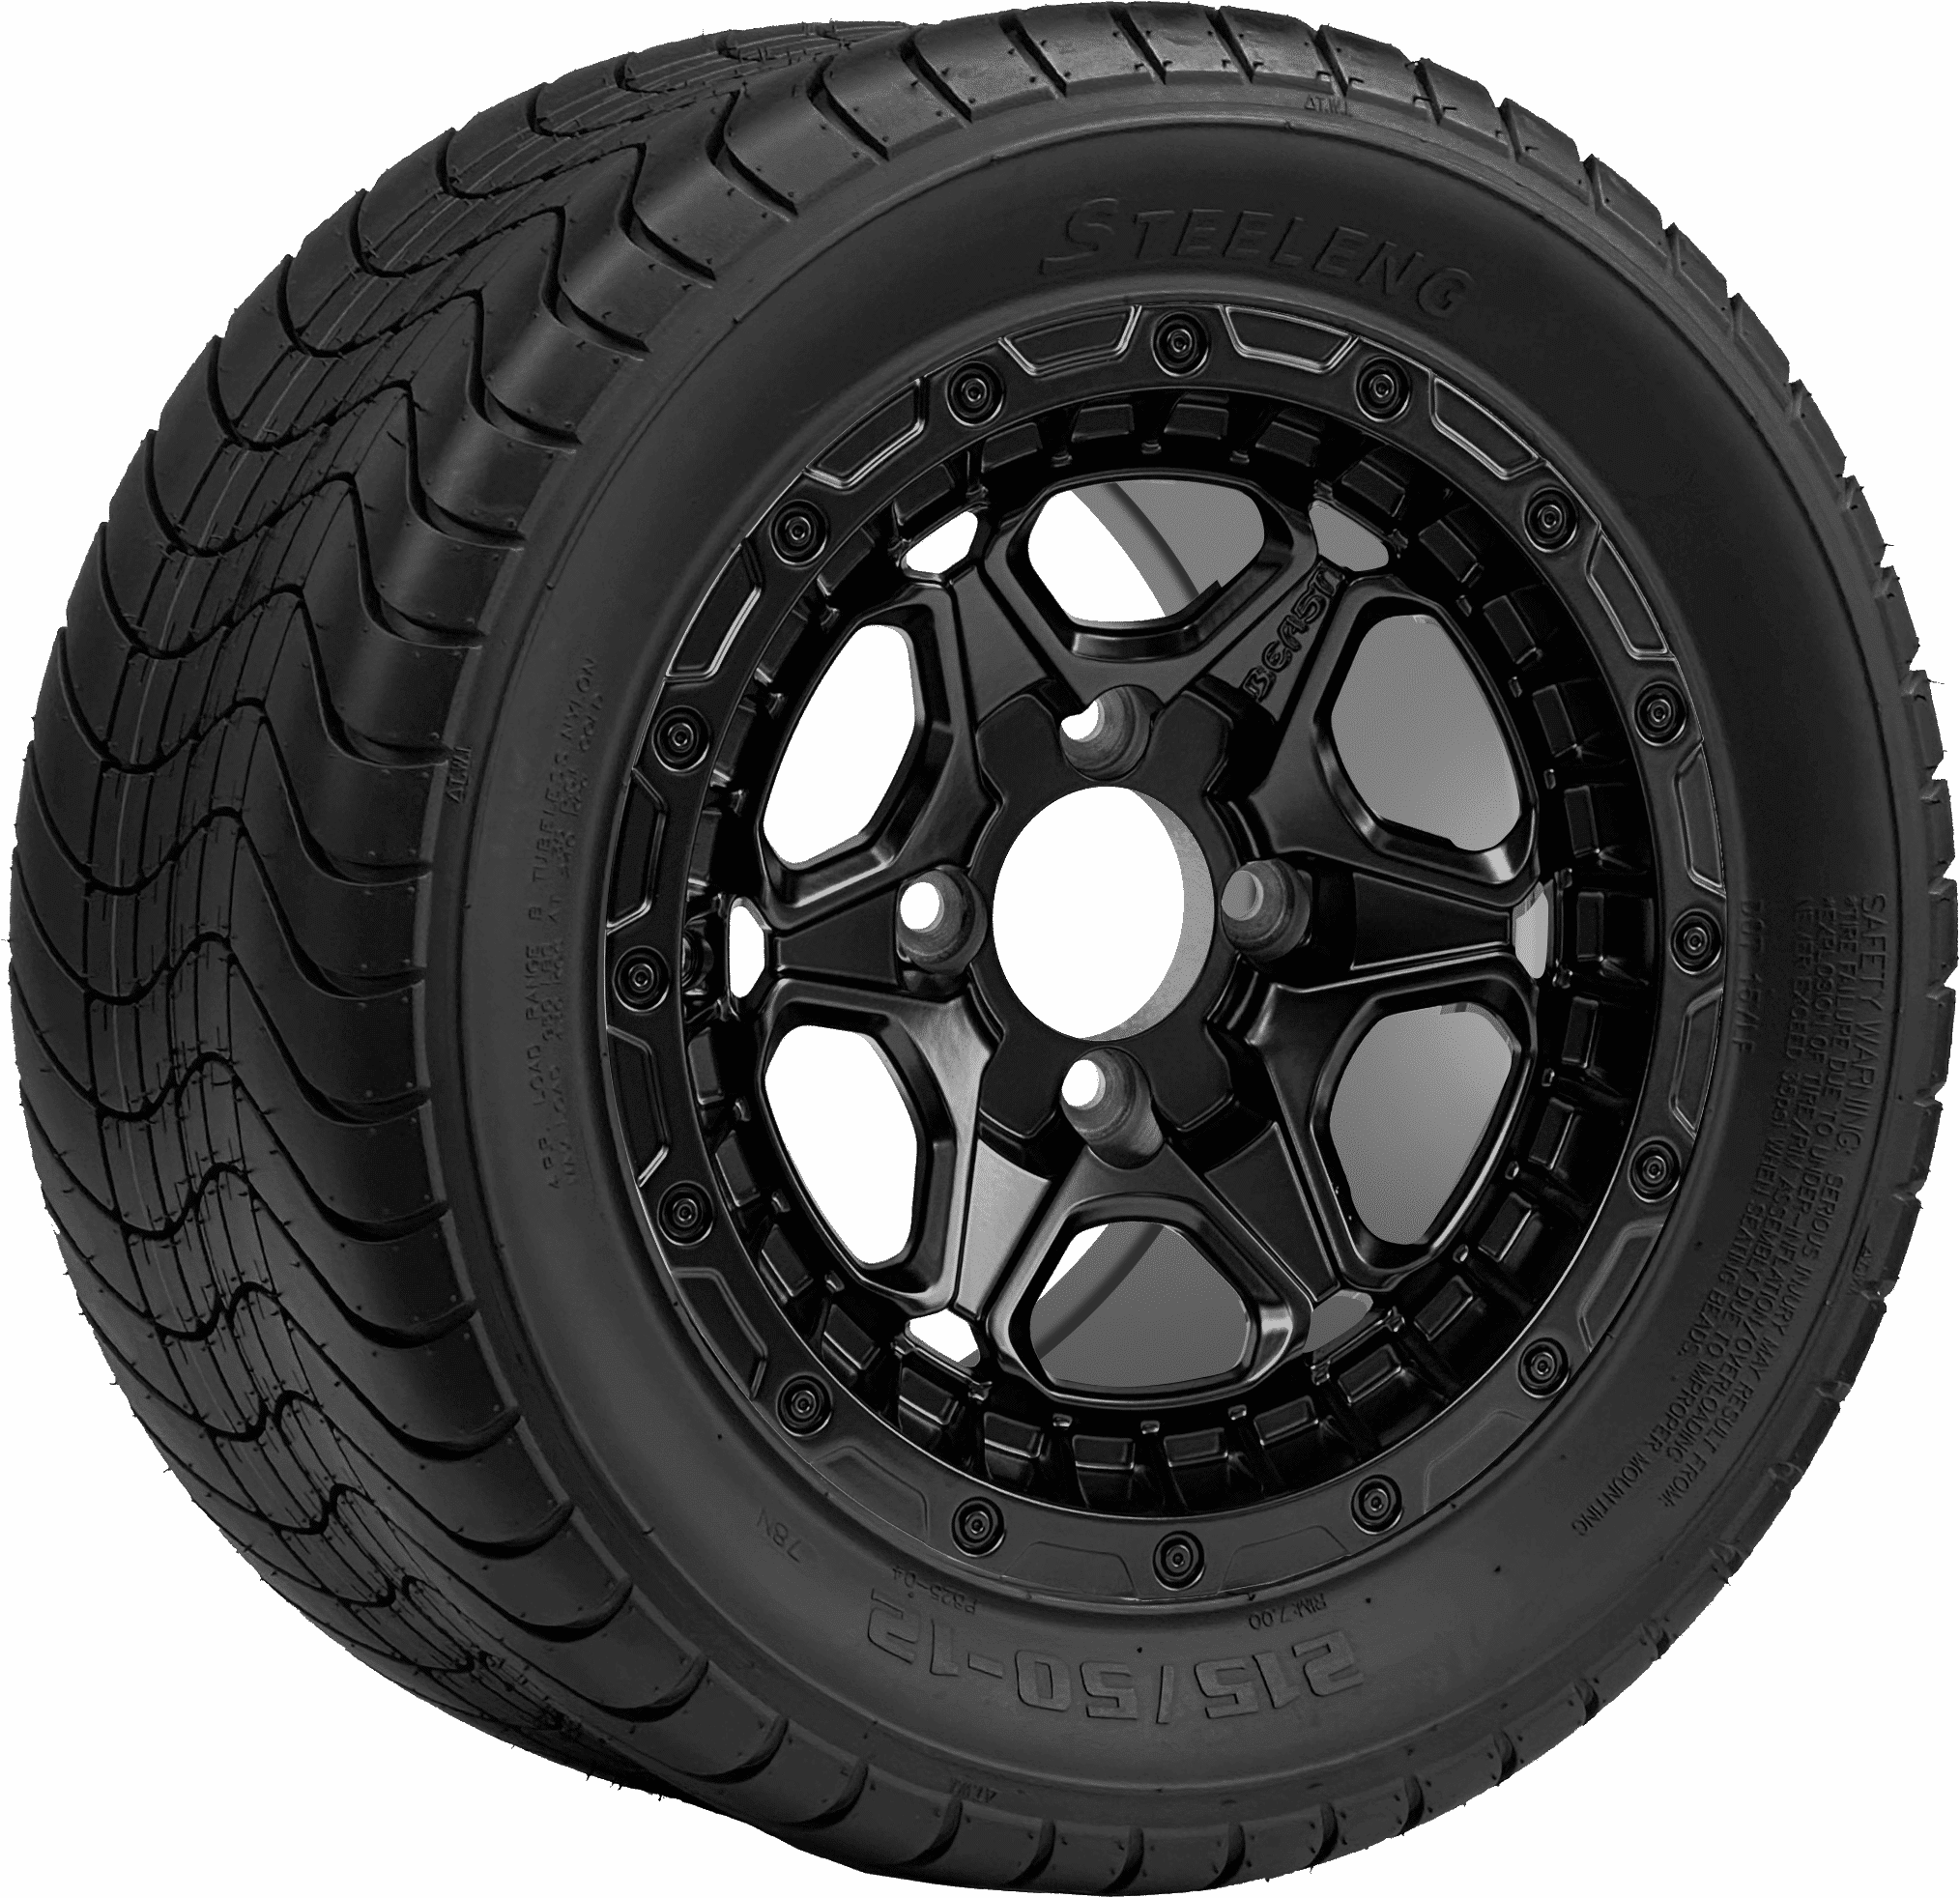 BNDL-TR1213-WH1265-CC0024-LN0003 12″ GRIZZLY MATTE BLACK WHEEL – ALUMINUM ALLOY / STEELENG 215/50-12 COMFORT RIDE STREET TIRE DOT APPROVED